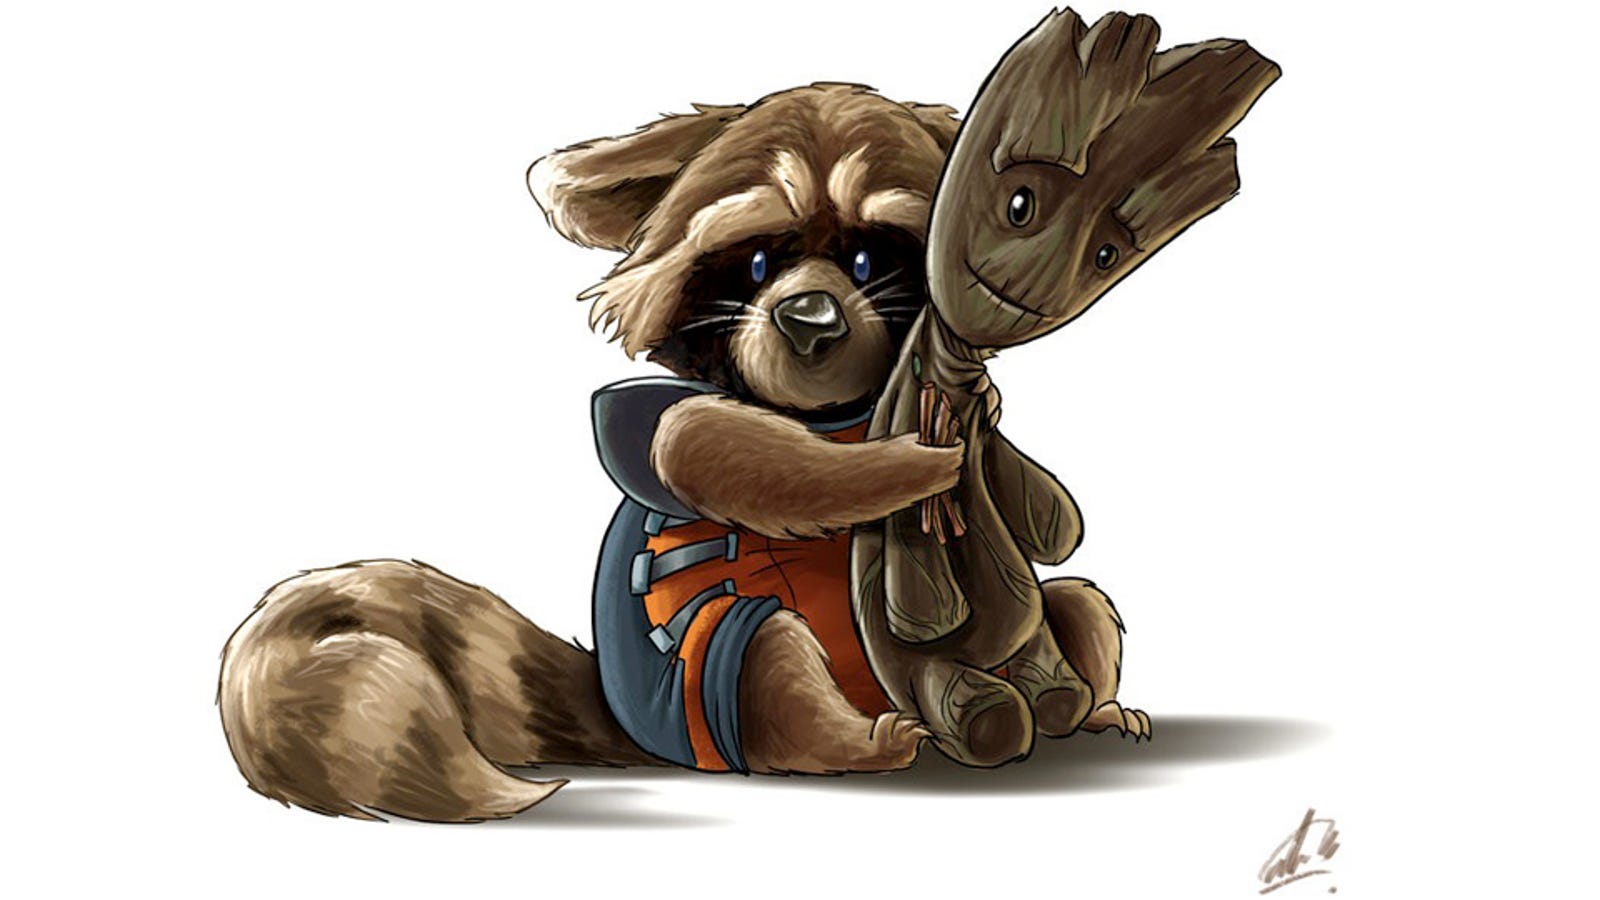 Need More Rocket And Groot? Here's a Ton of Fan Art to Warm Your Heart